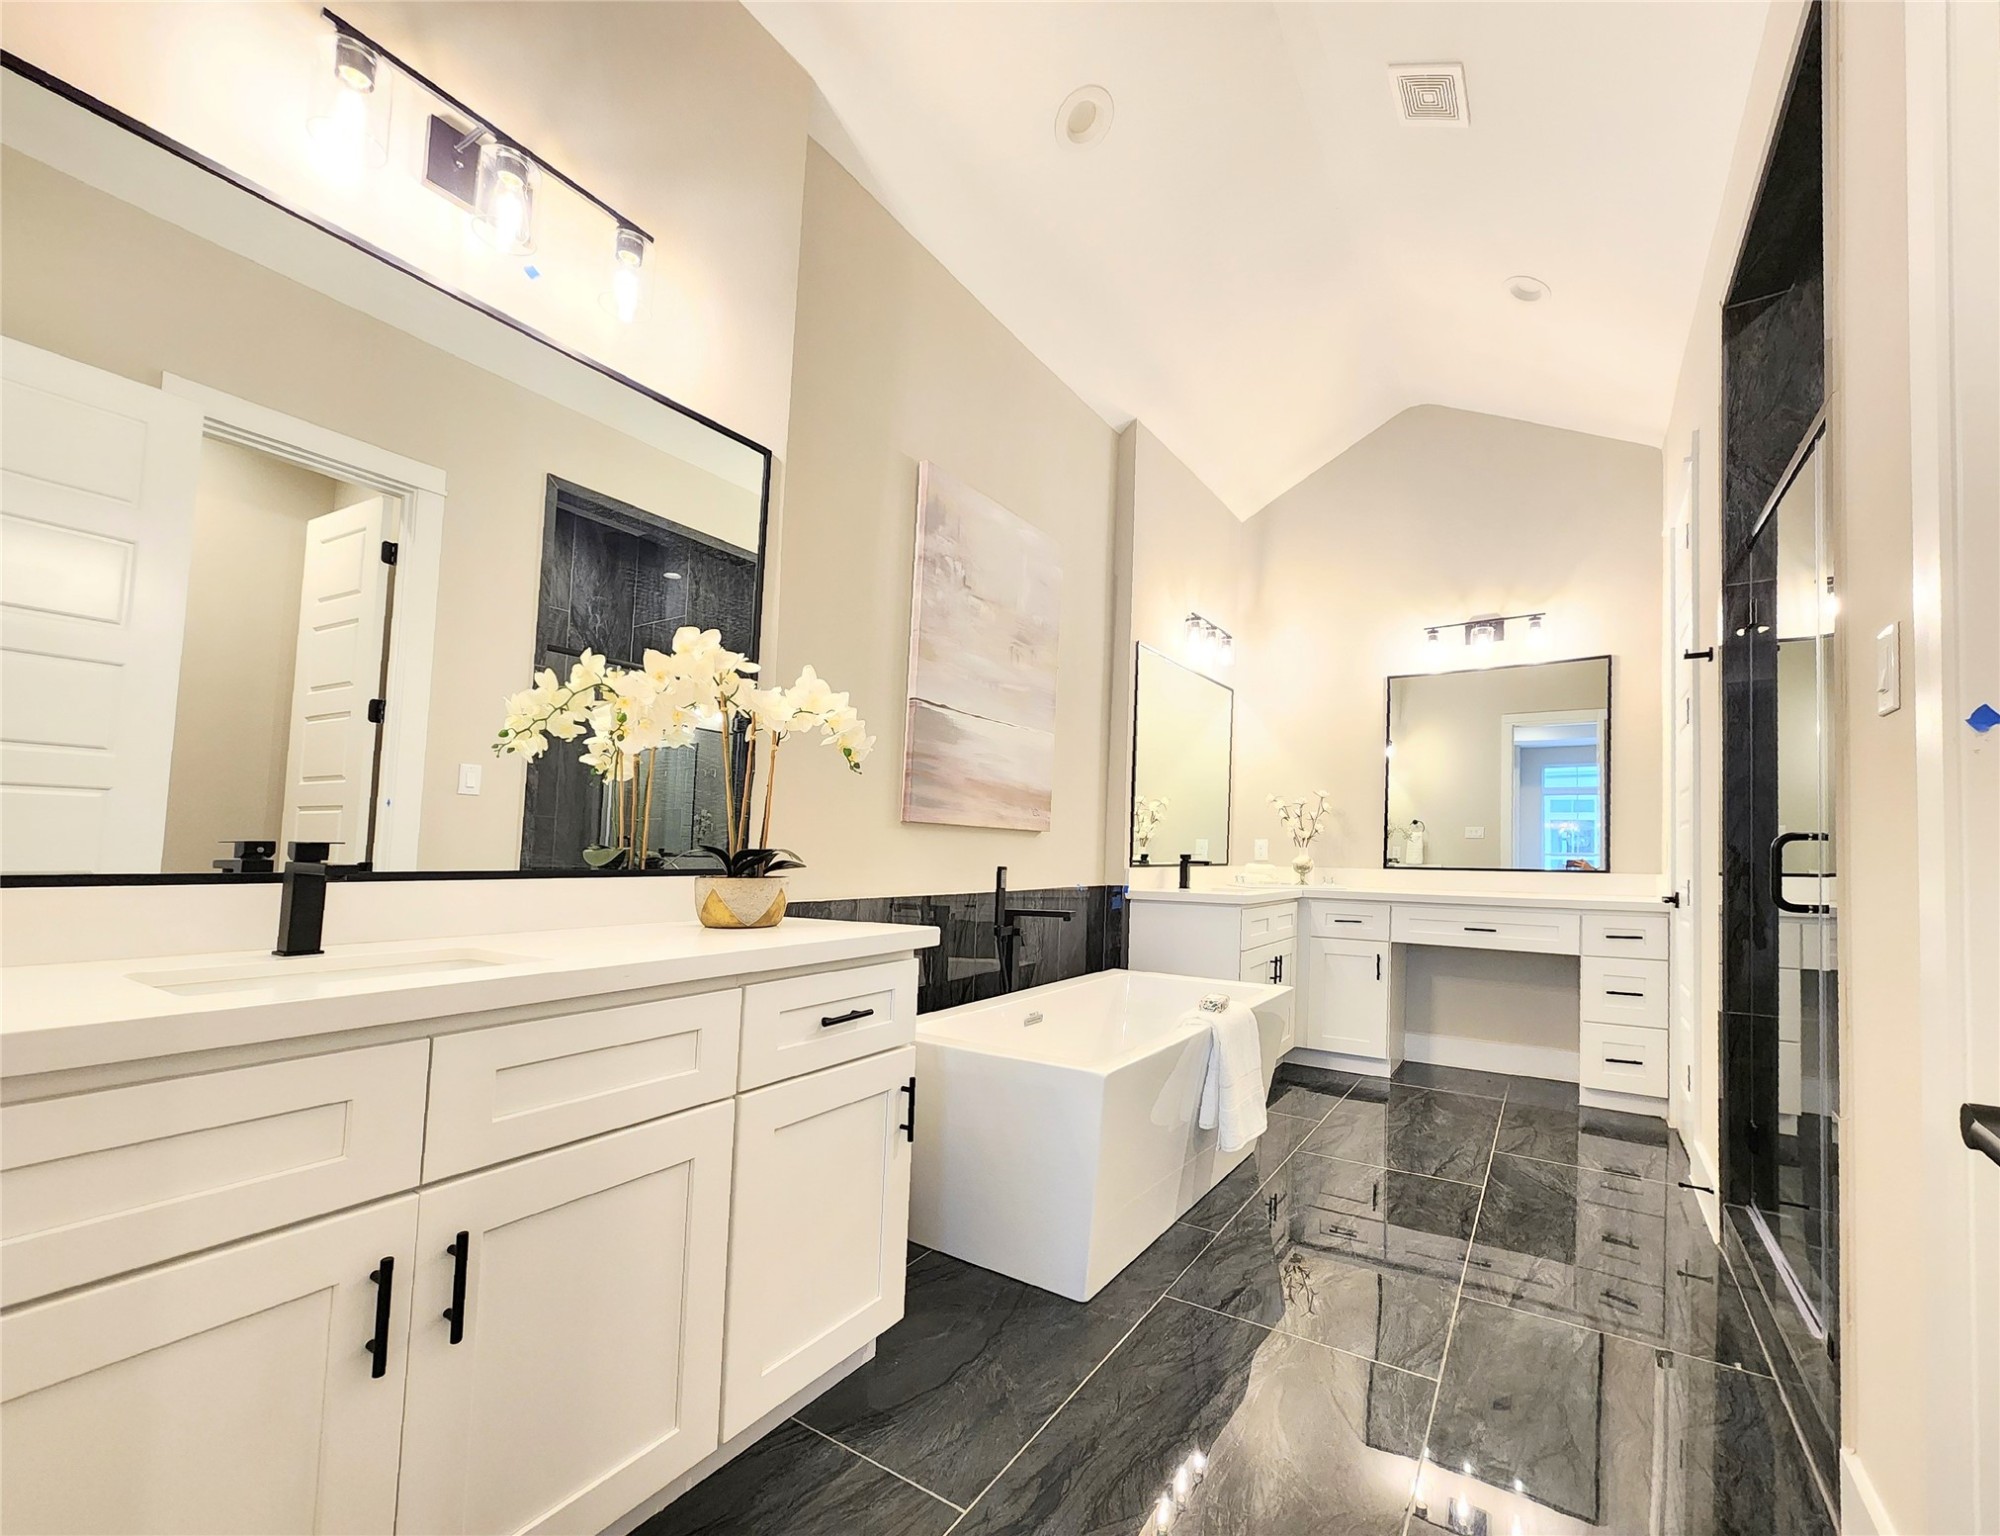 Stunning primary bath complete with vaulted ceiling, expansive double vanities separated by a n inviting soaker tub